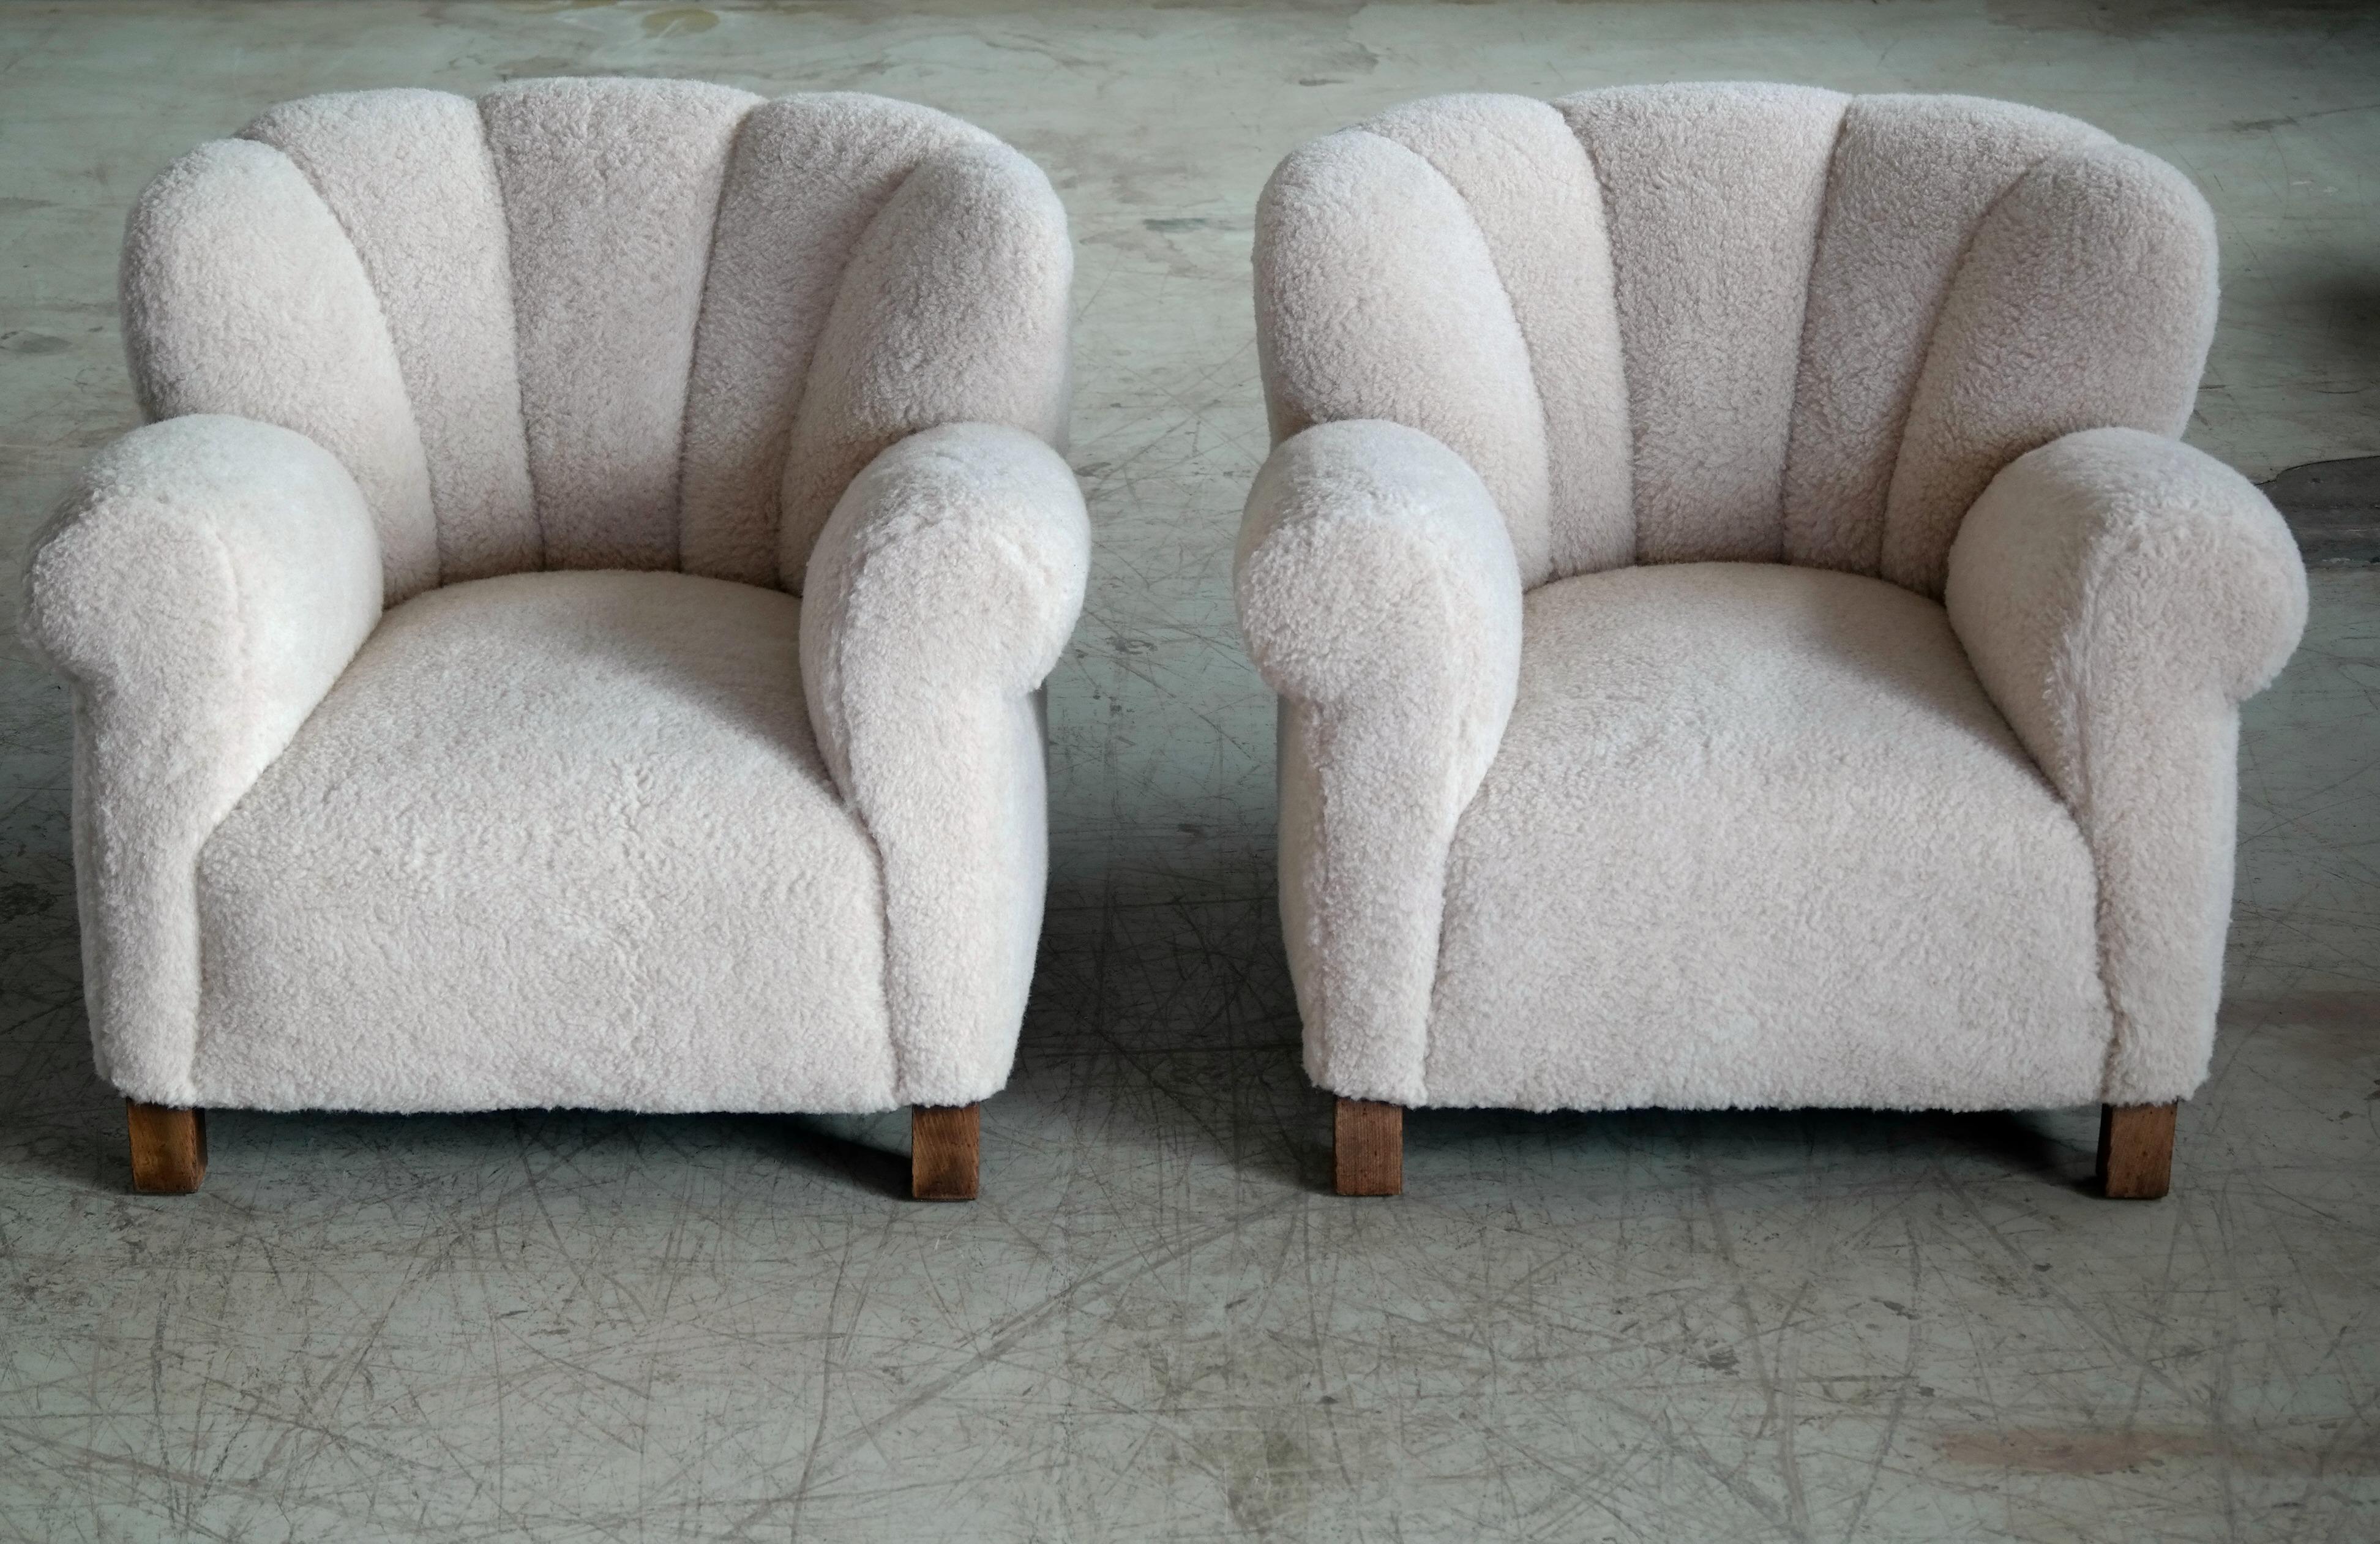 Pair of sublime large scale pair of model 1518 lounge club chairs made by Fritz Hansen in the late 1930s or early 1940s. This model came in two heights - this being the low back model which is quite rare. Superbly comfortable the chairs with their